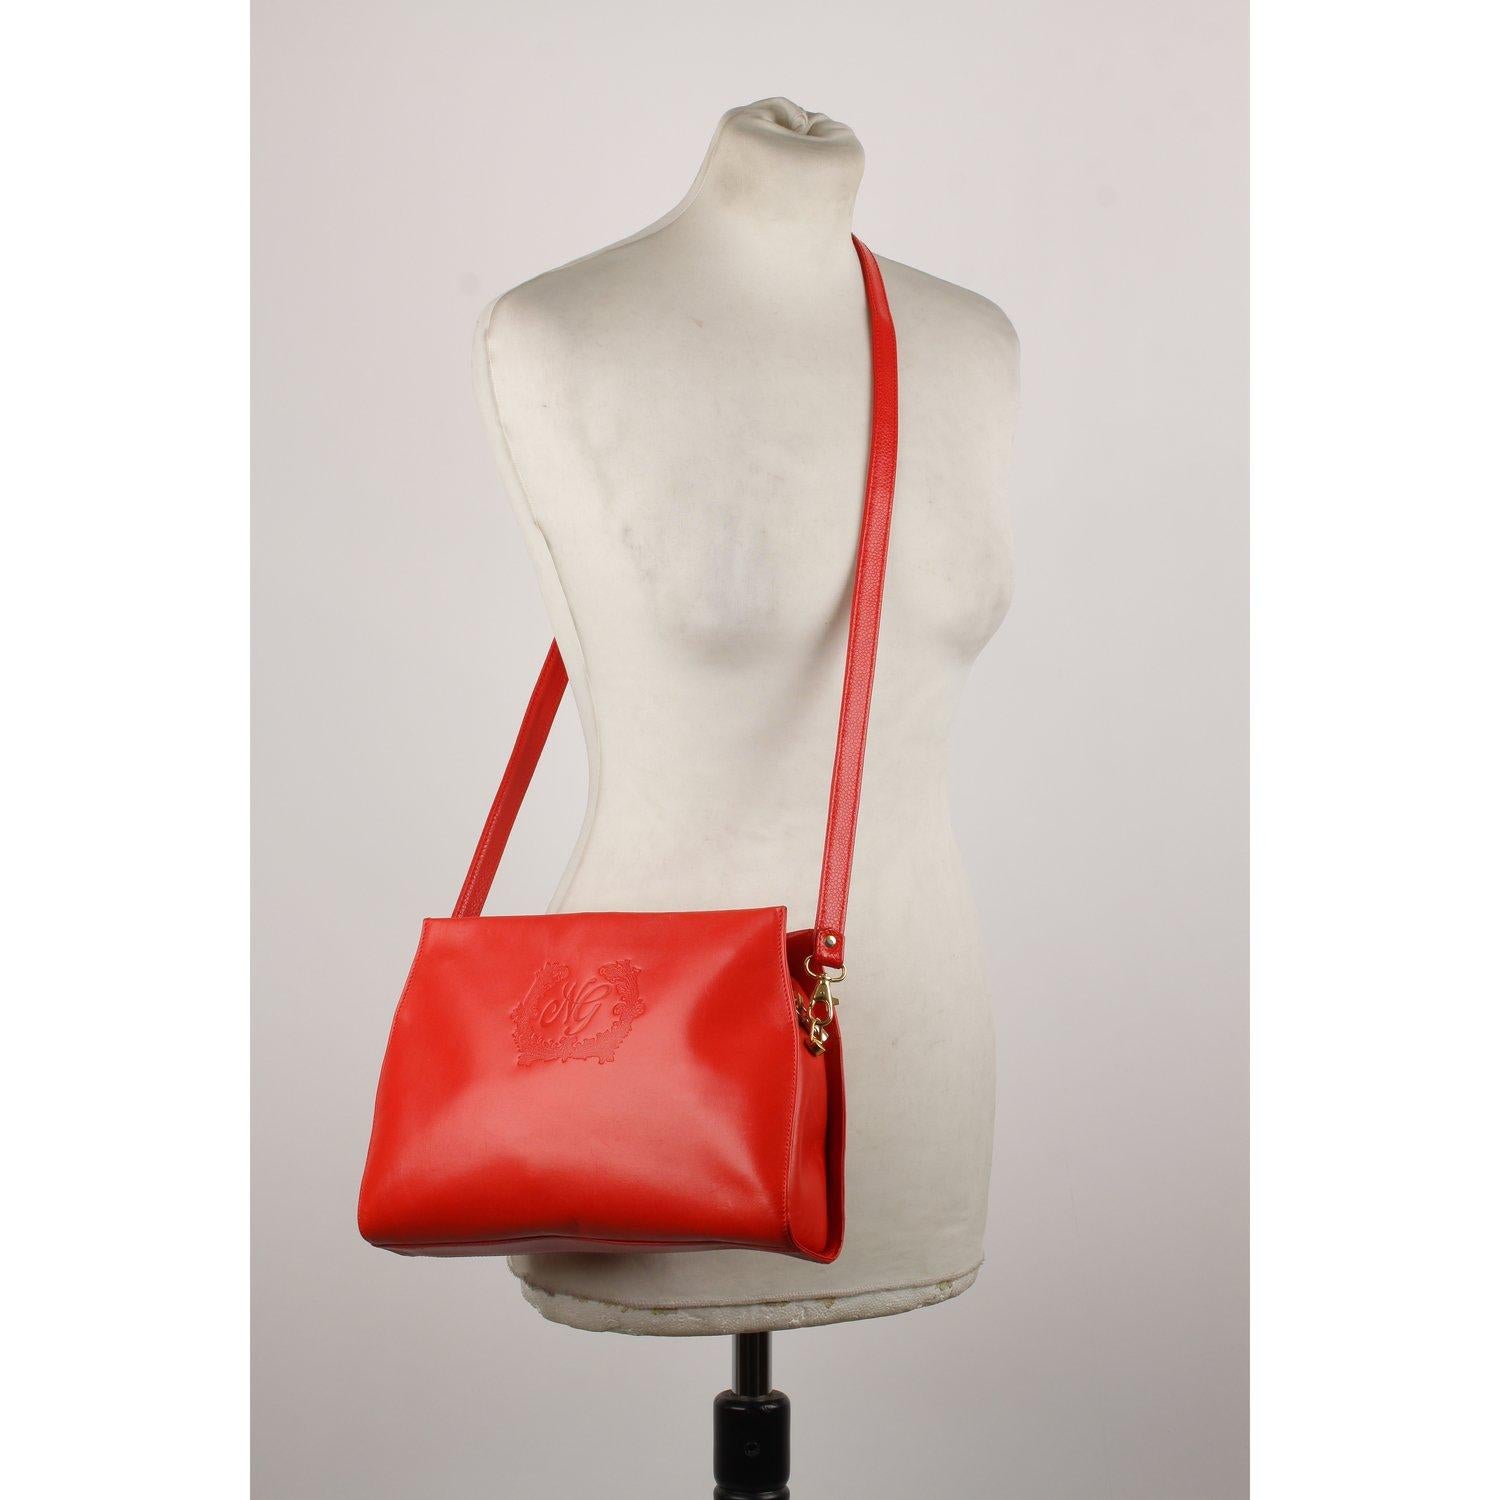 MATERIAL: Leather COLOR: Red MODEL: Shoulder Bag GENDER: Women SIZE: Small Condition CONDITION DETAILS: B :GOOD CONDITION - Some light wear of use - Some scratches on leather due to normal use. Some darkness on bottom corners, Measurements